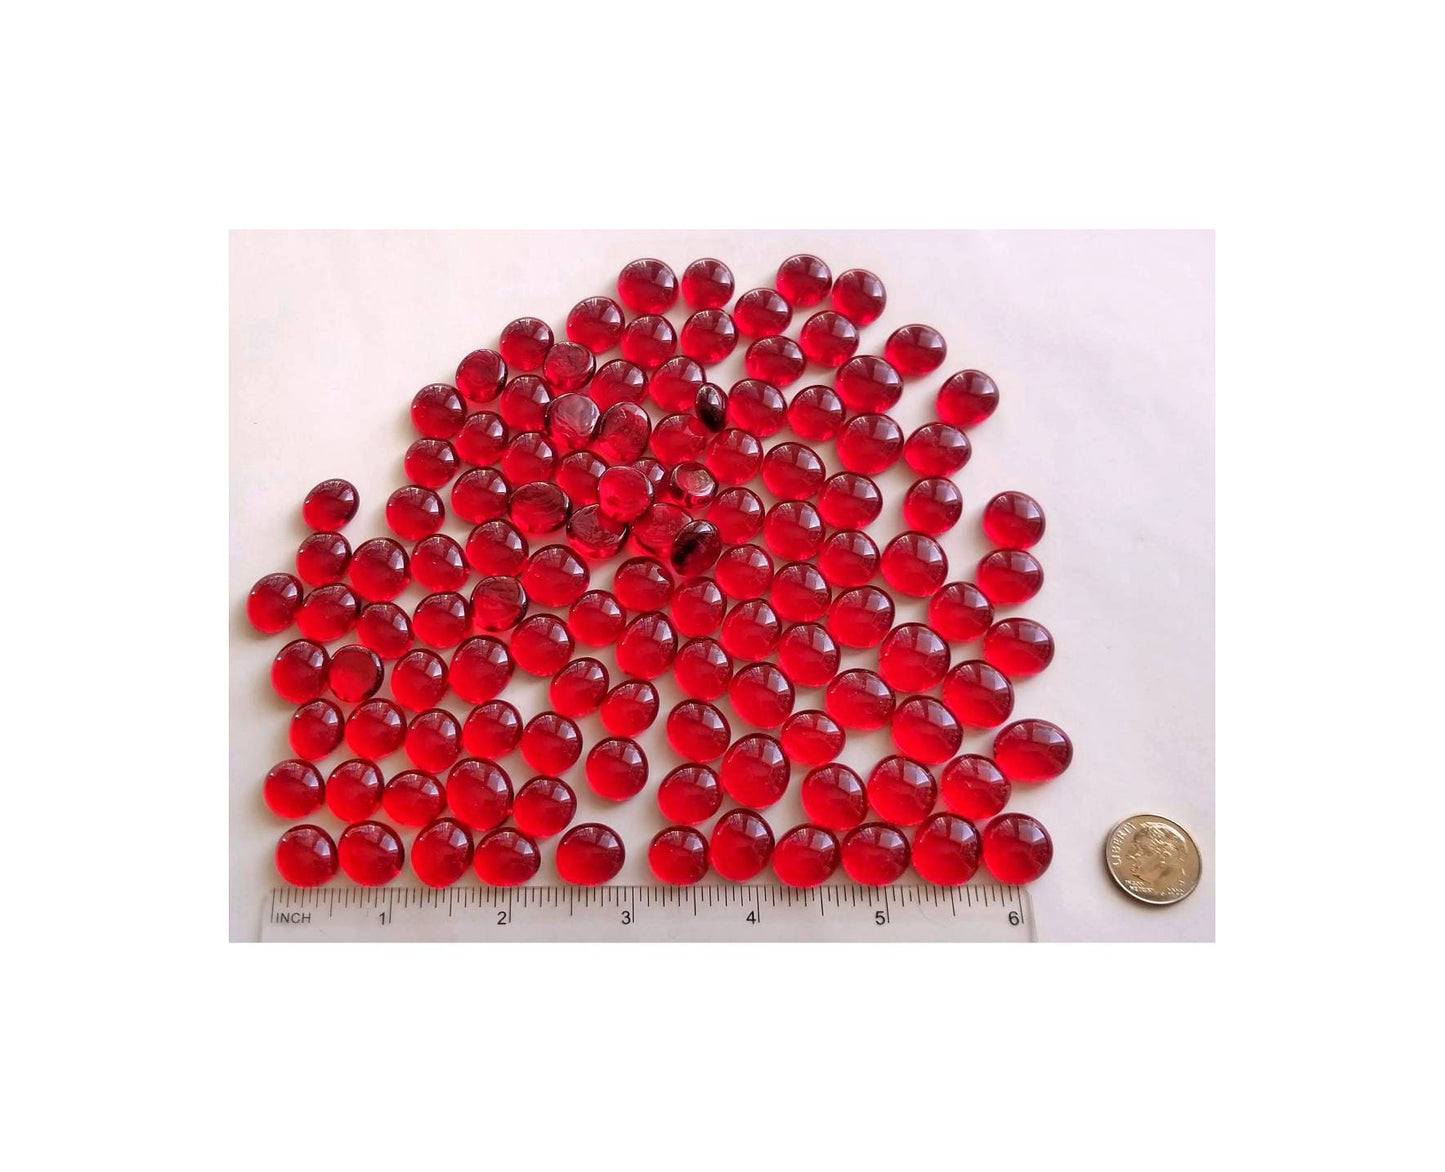 Small Red Glass Nuggets for Stained Glass. 96 coe Fusible. Steppingstones, Mosaic. Jewelry Gems. Diy Holiday Craft Projects, Holly berry.